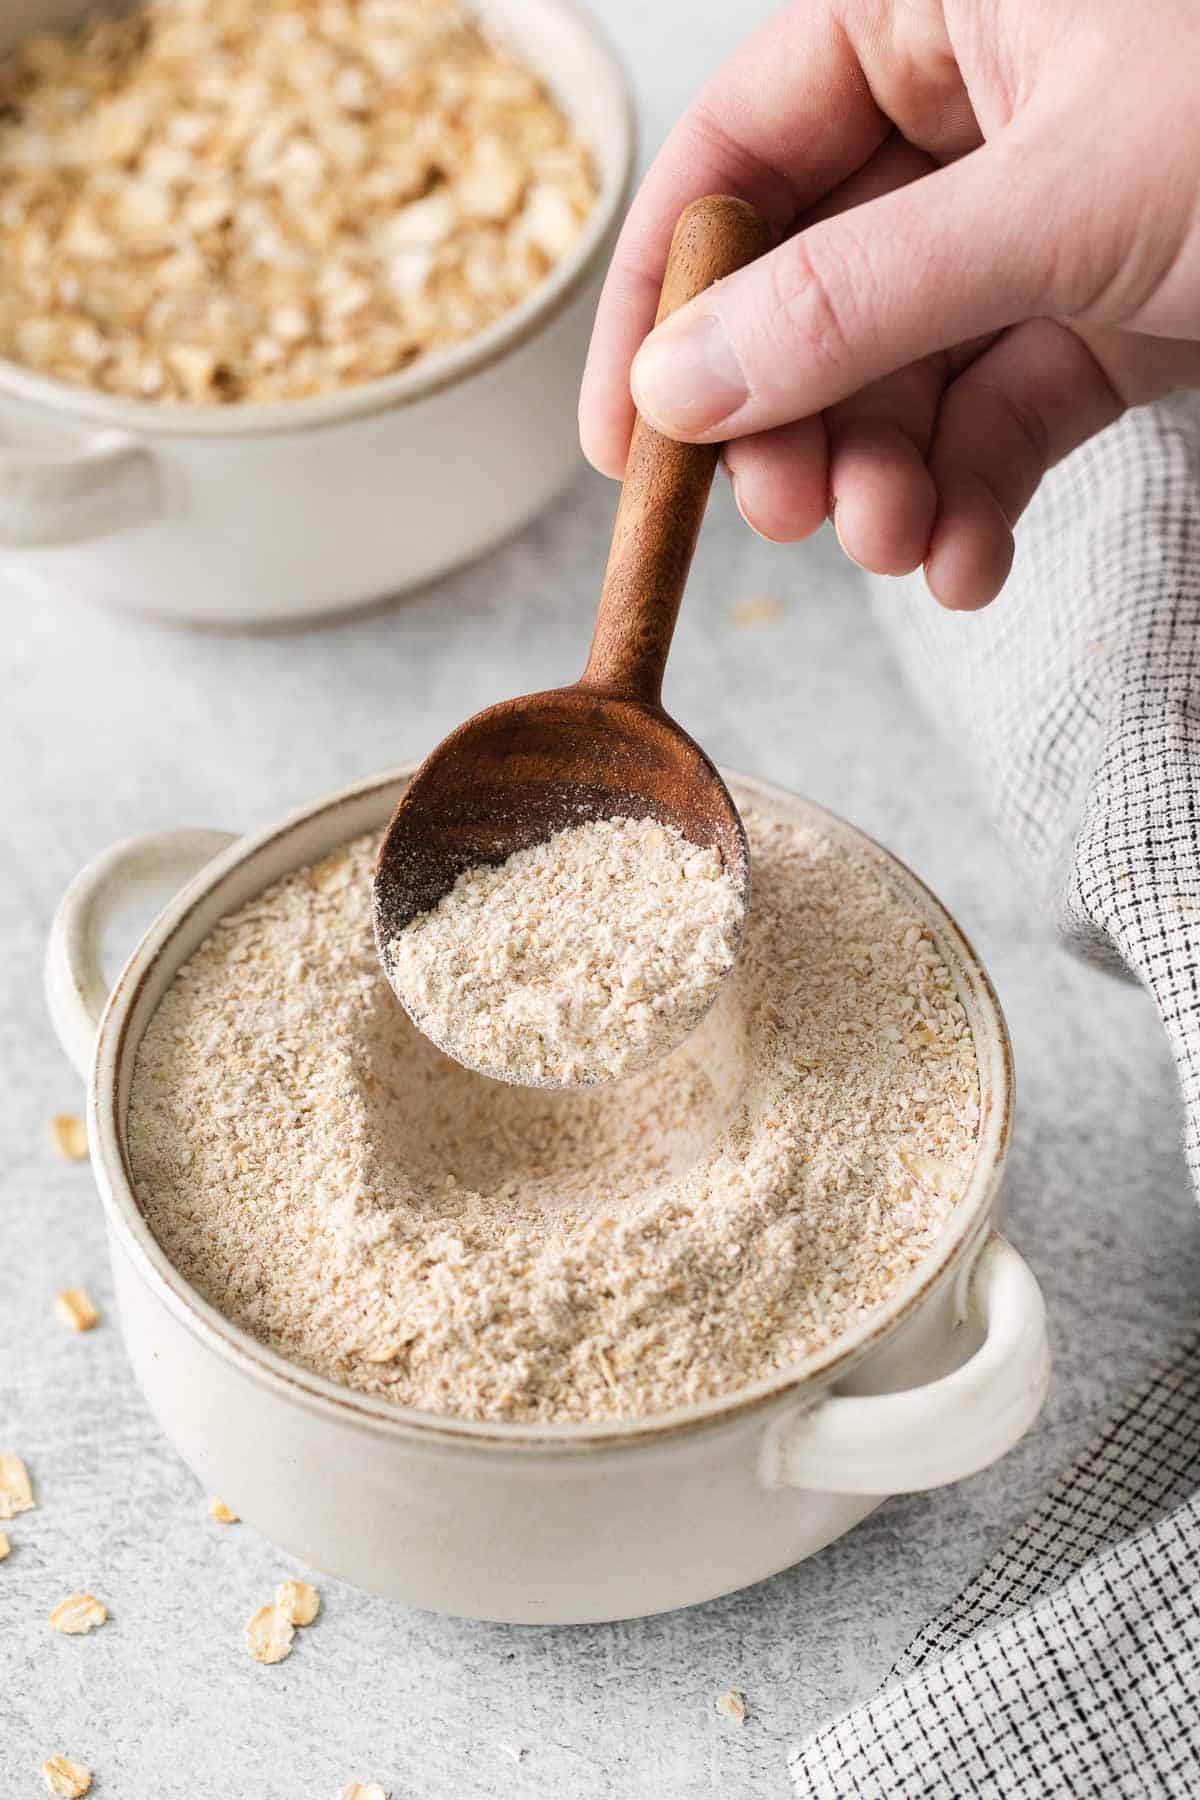 A hand holding a spoon and scooping up gluten-free oat flour from a bowl